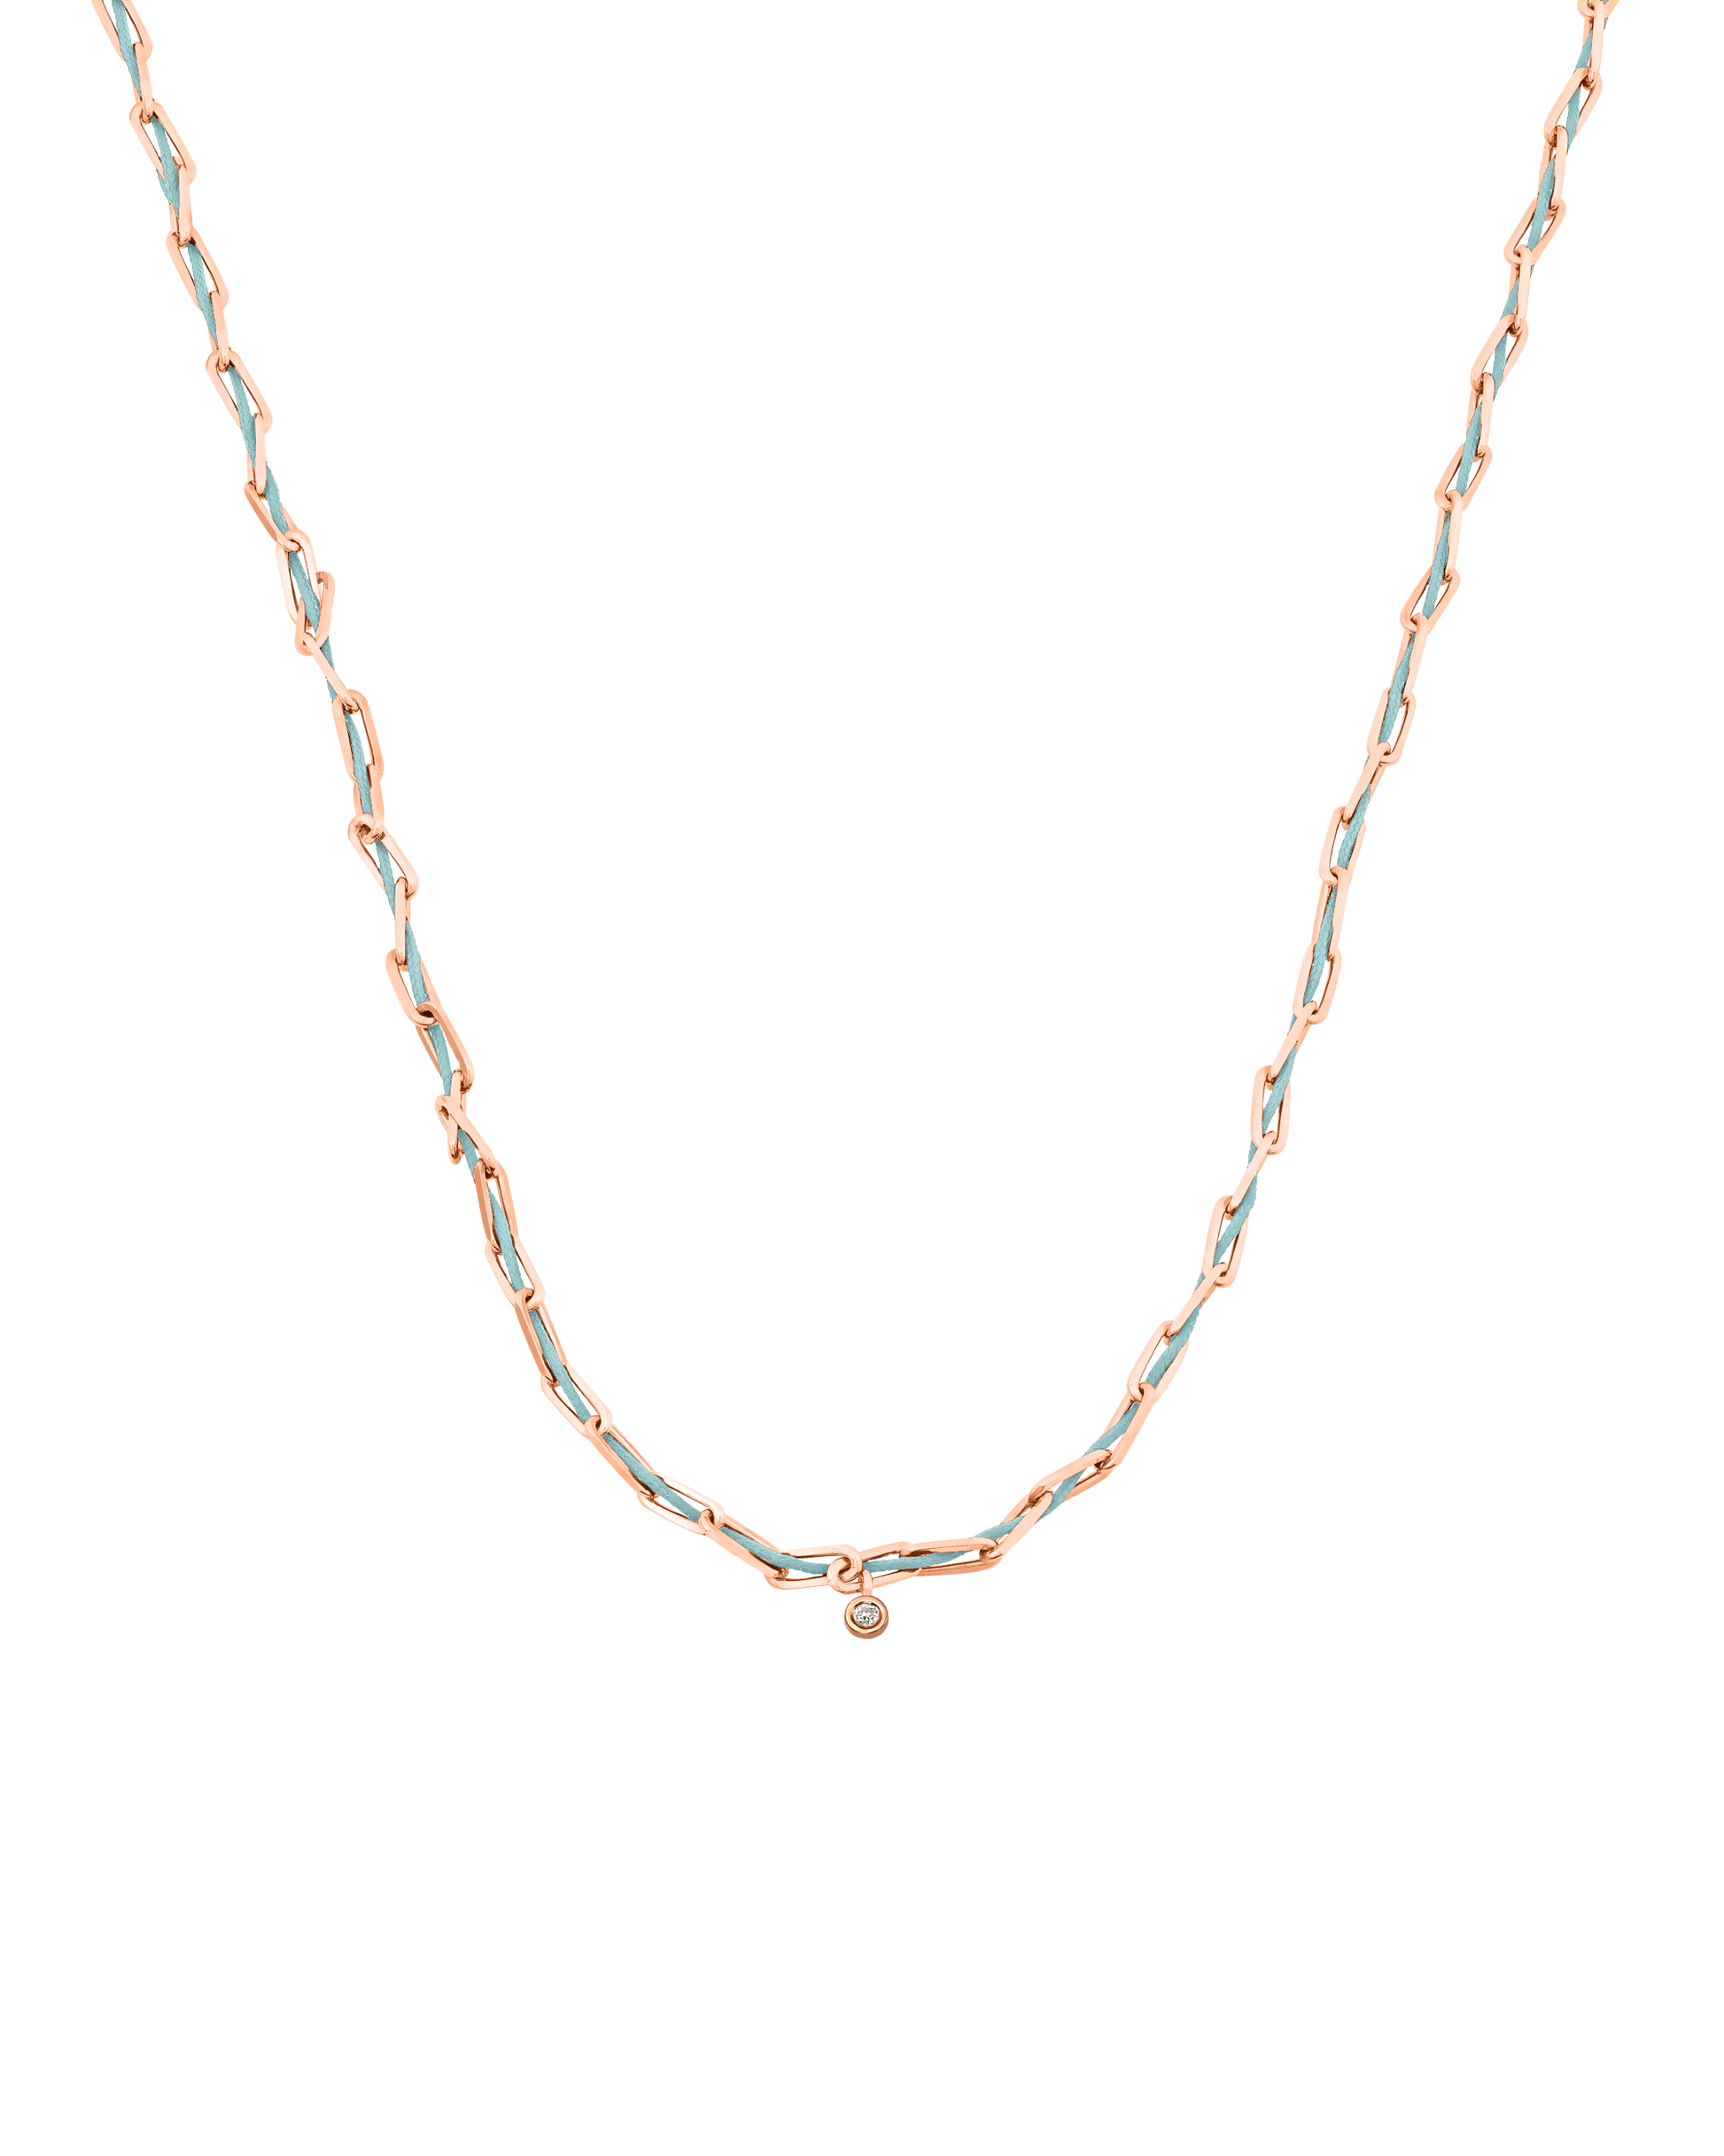 Twine Diamond Necklace - 18K Rose Vermeil Necklaces magal-dev Turquoise Small: 0.03ct 16"